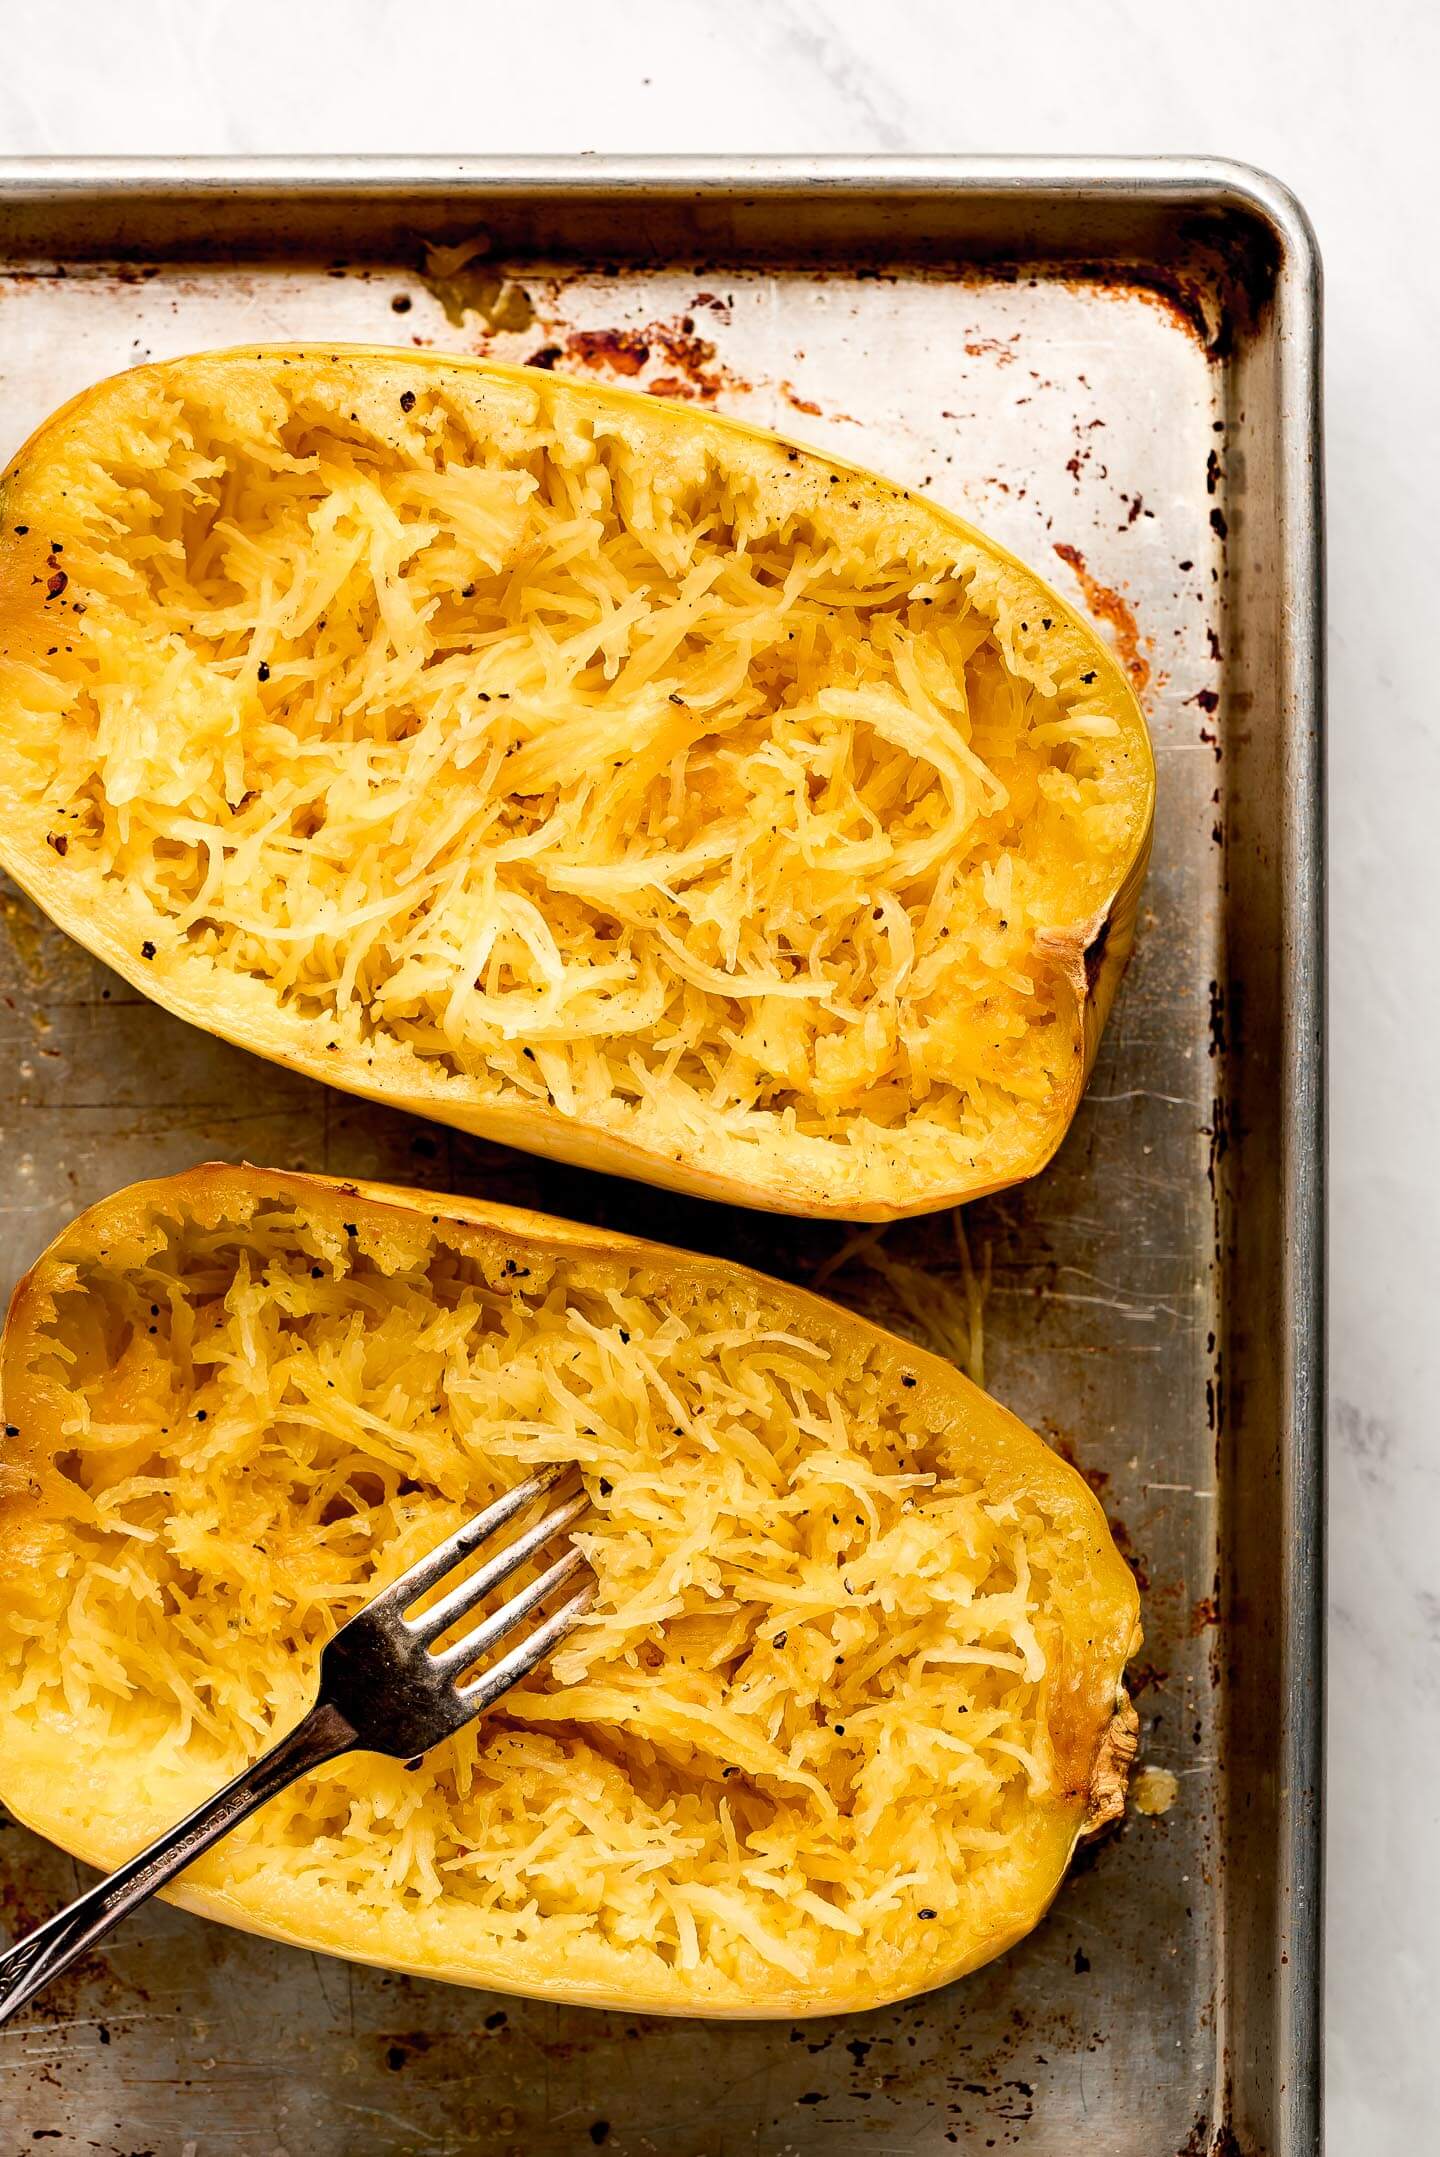 Two halves of spaghetti squash fluffed with a fork.